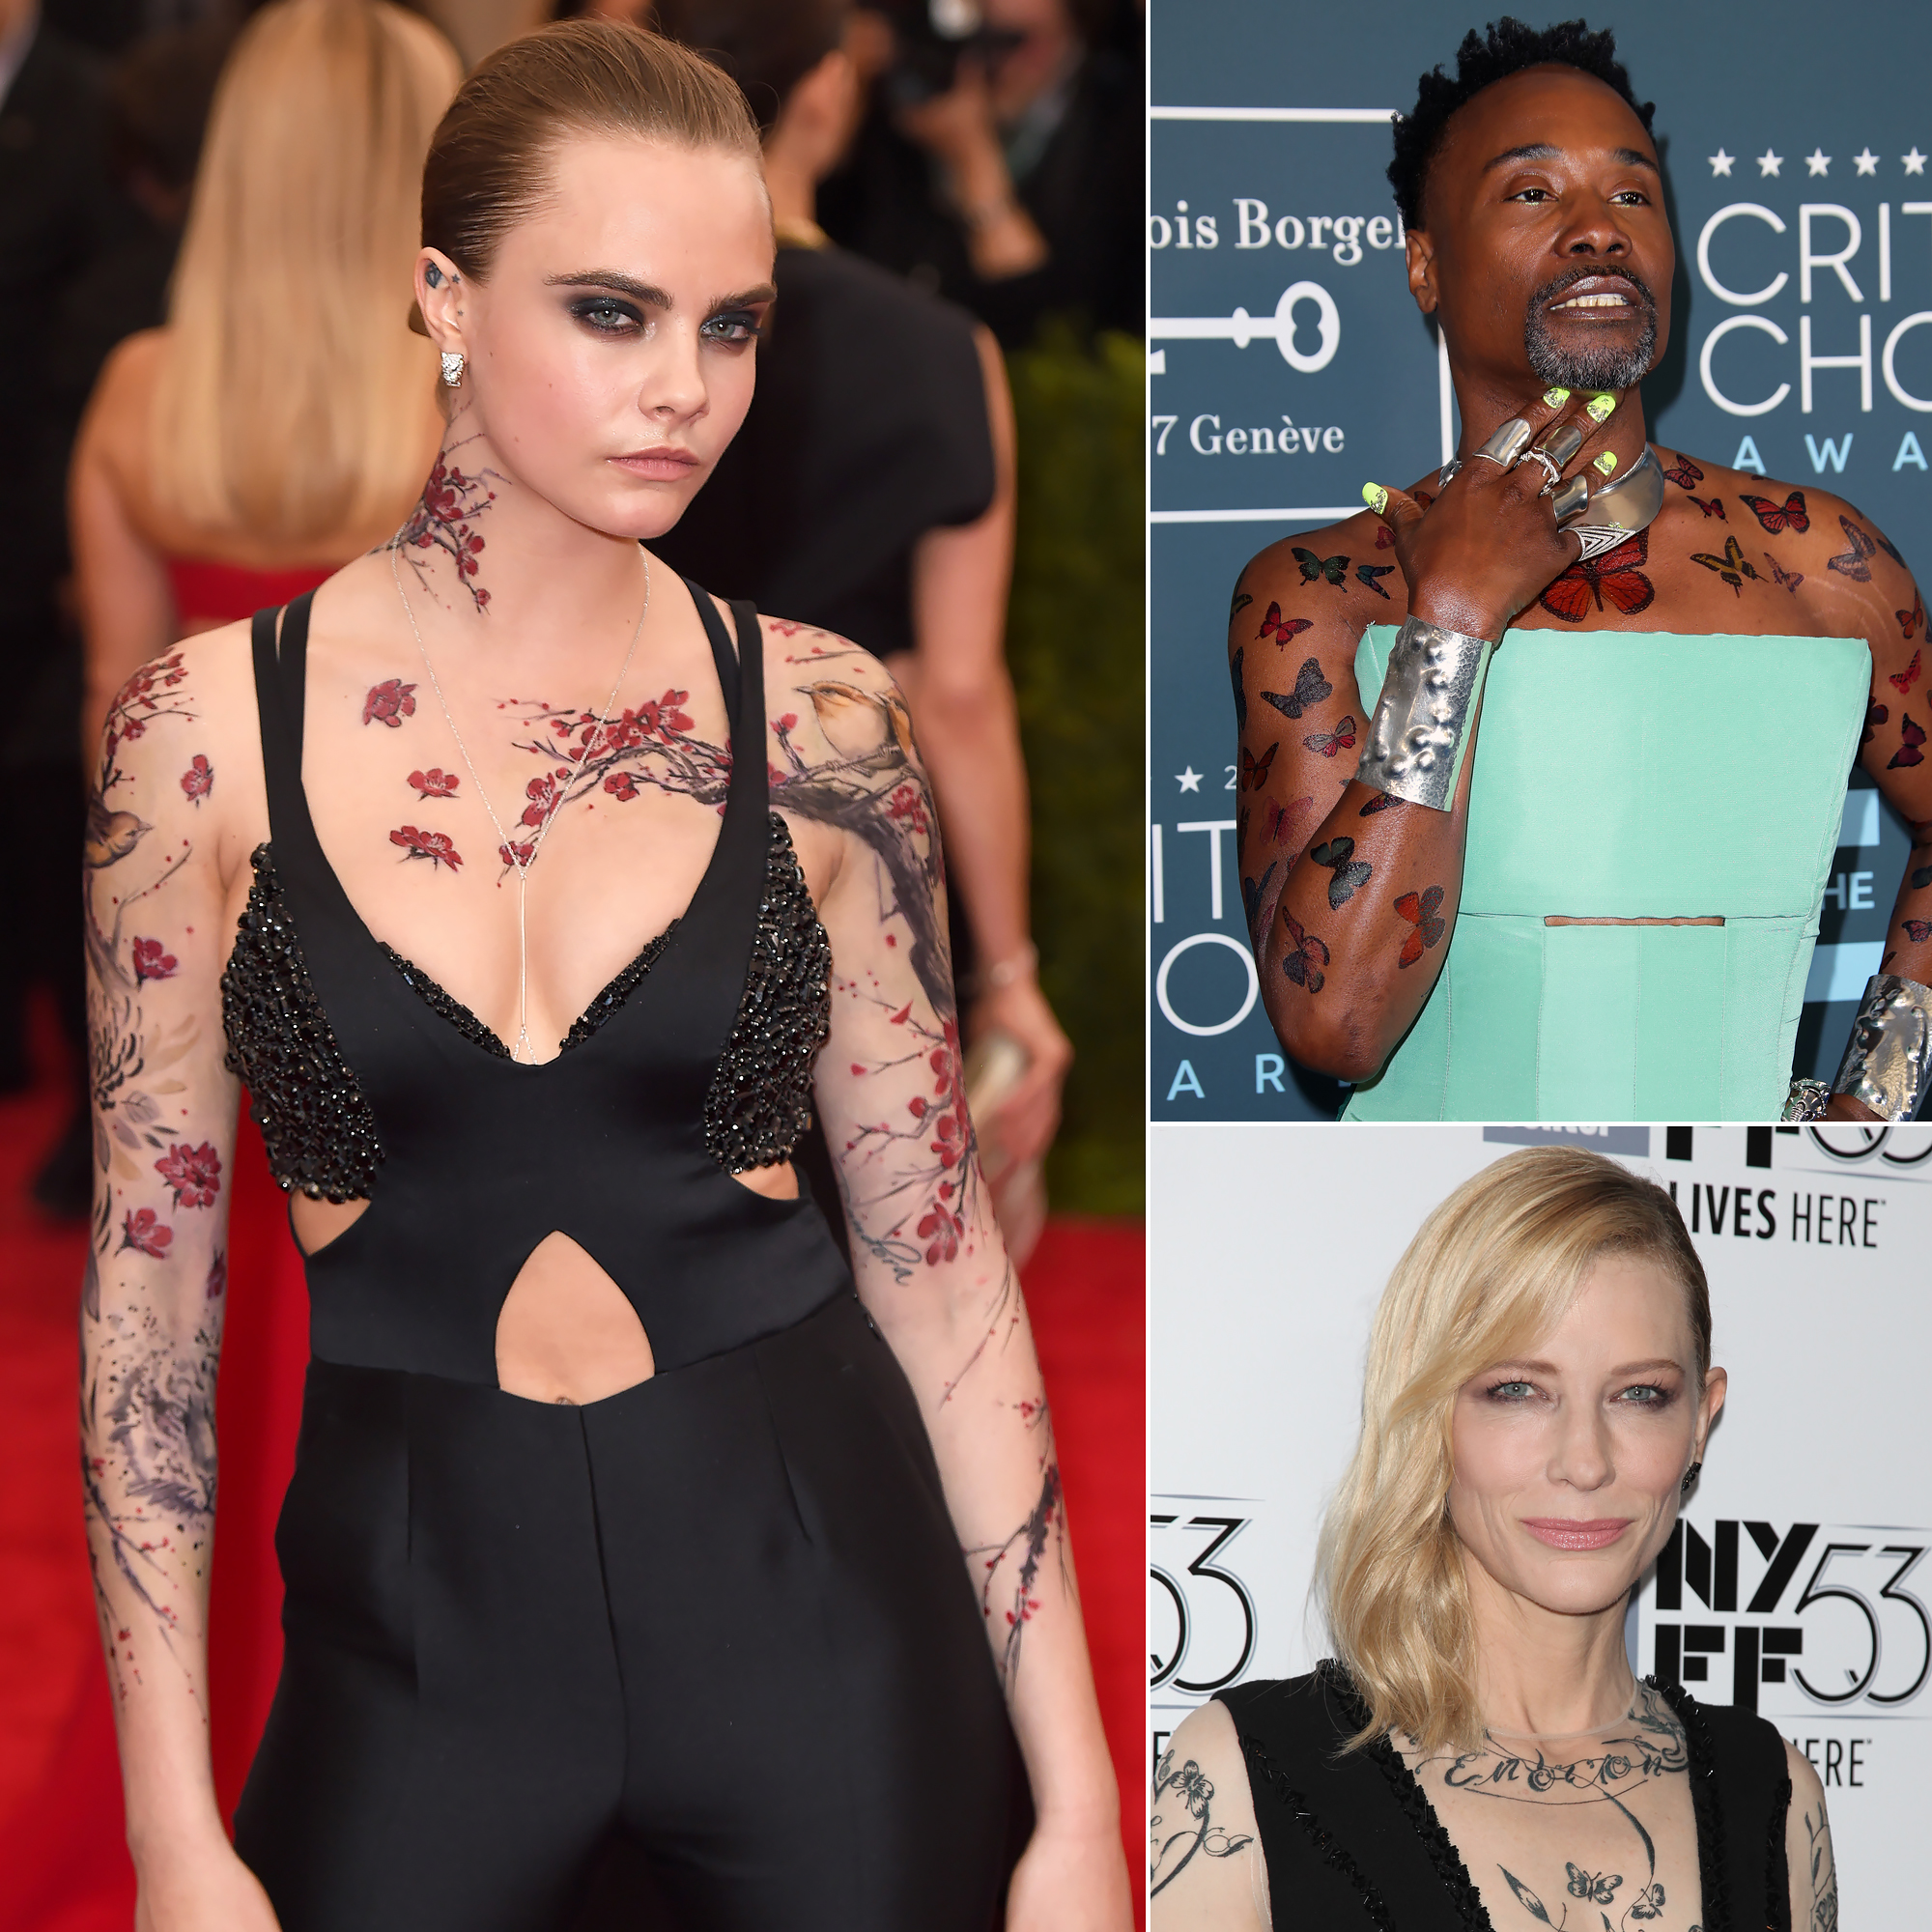 Celebrities with face tattoos: Justin Bieber, Halsey and more | Fox News